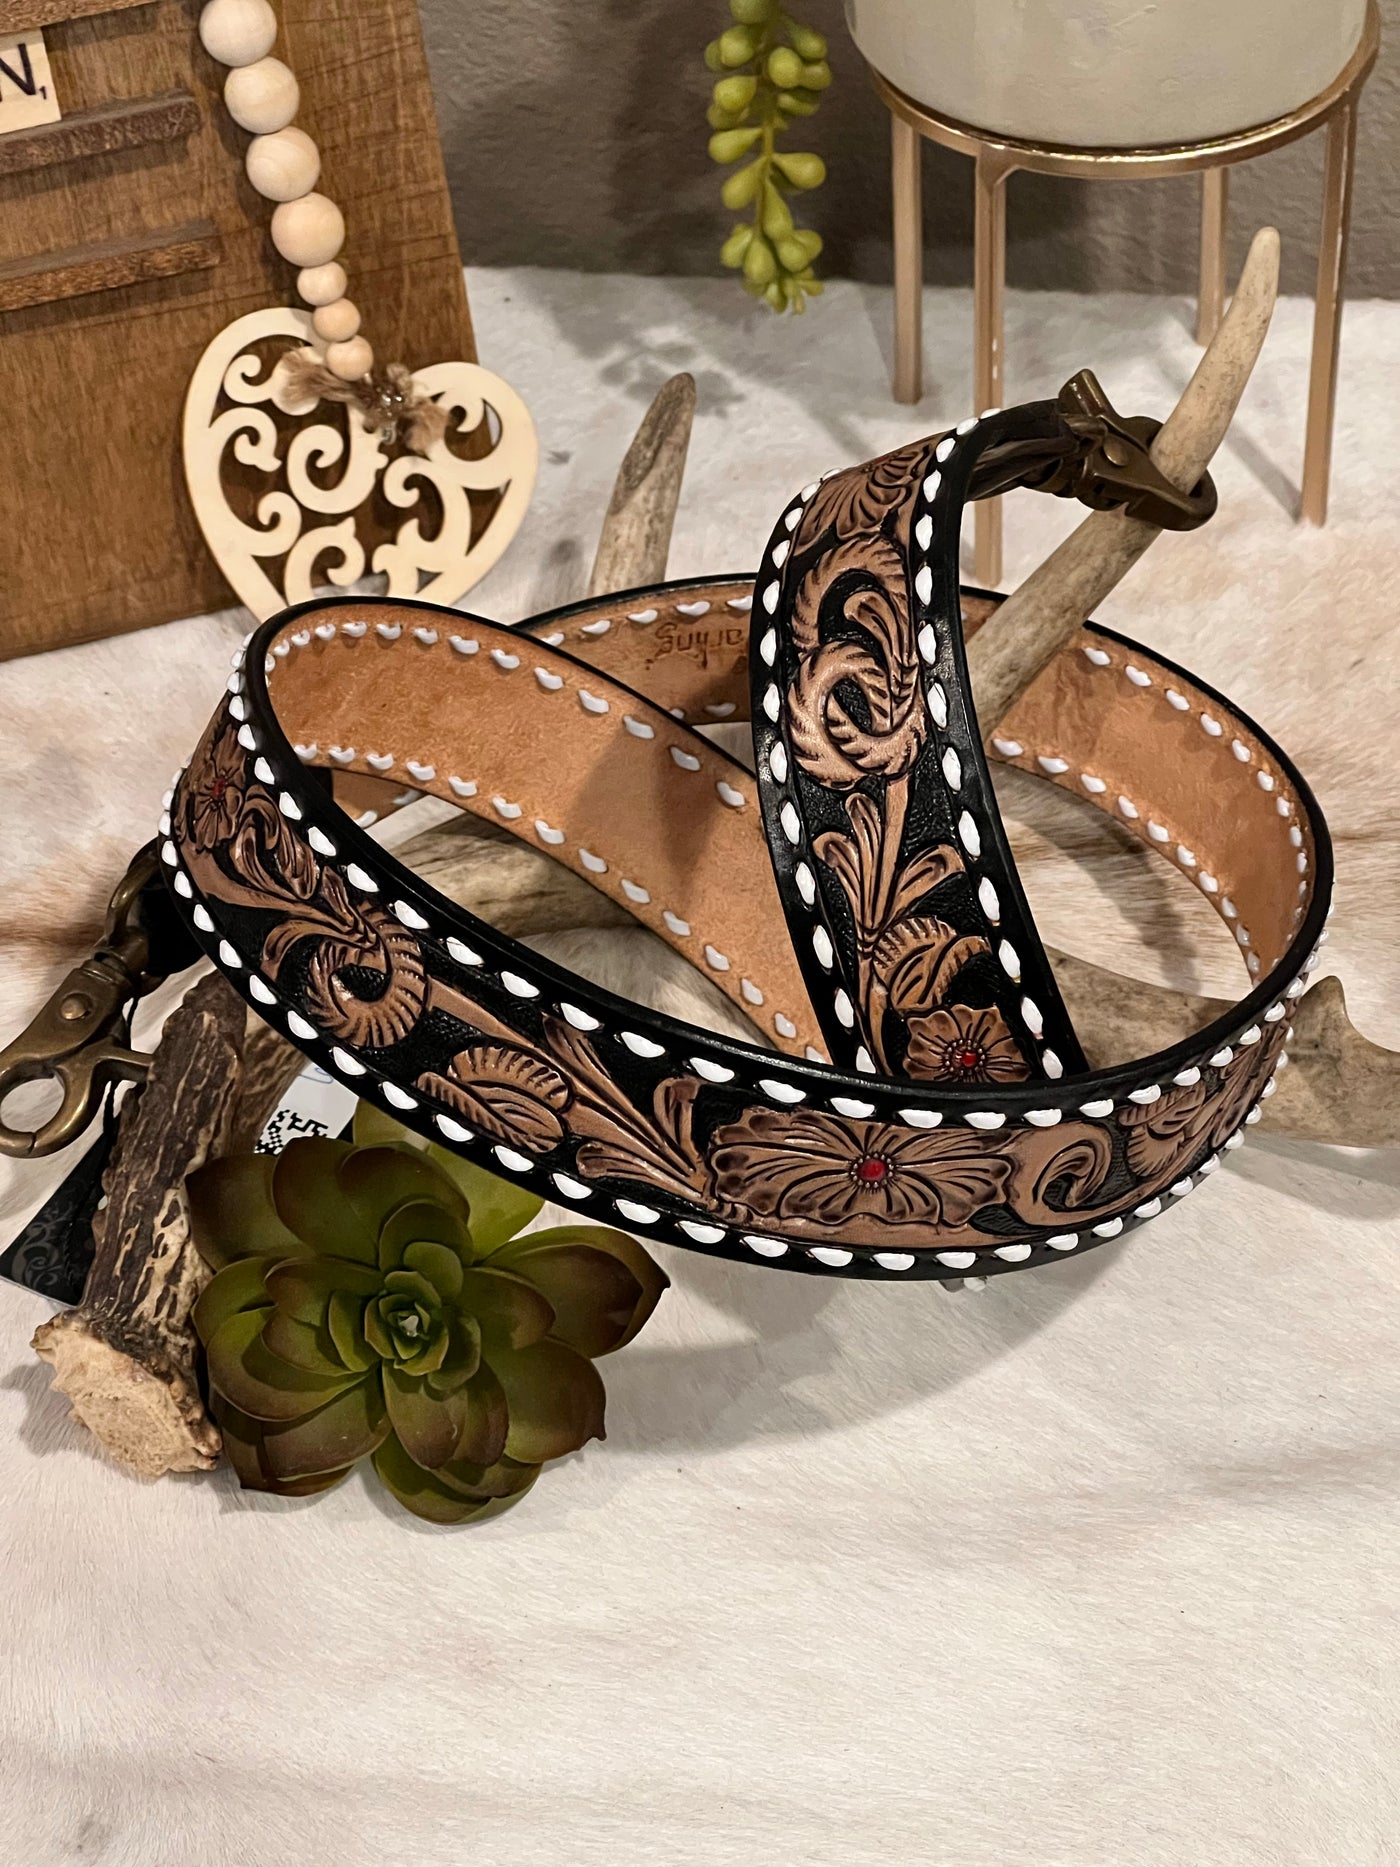 Tooled Leather Purse Strap ~ Black & Brown Floral